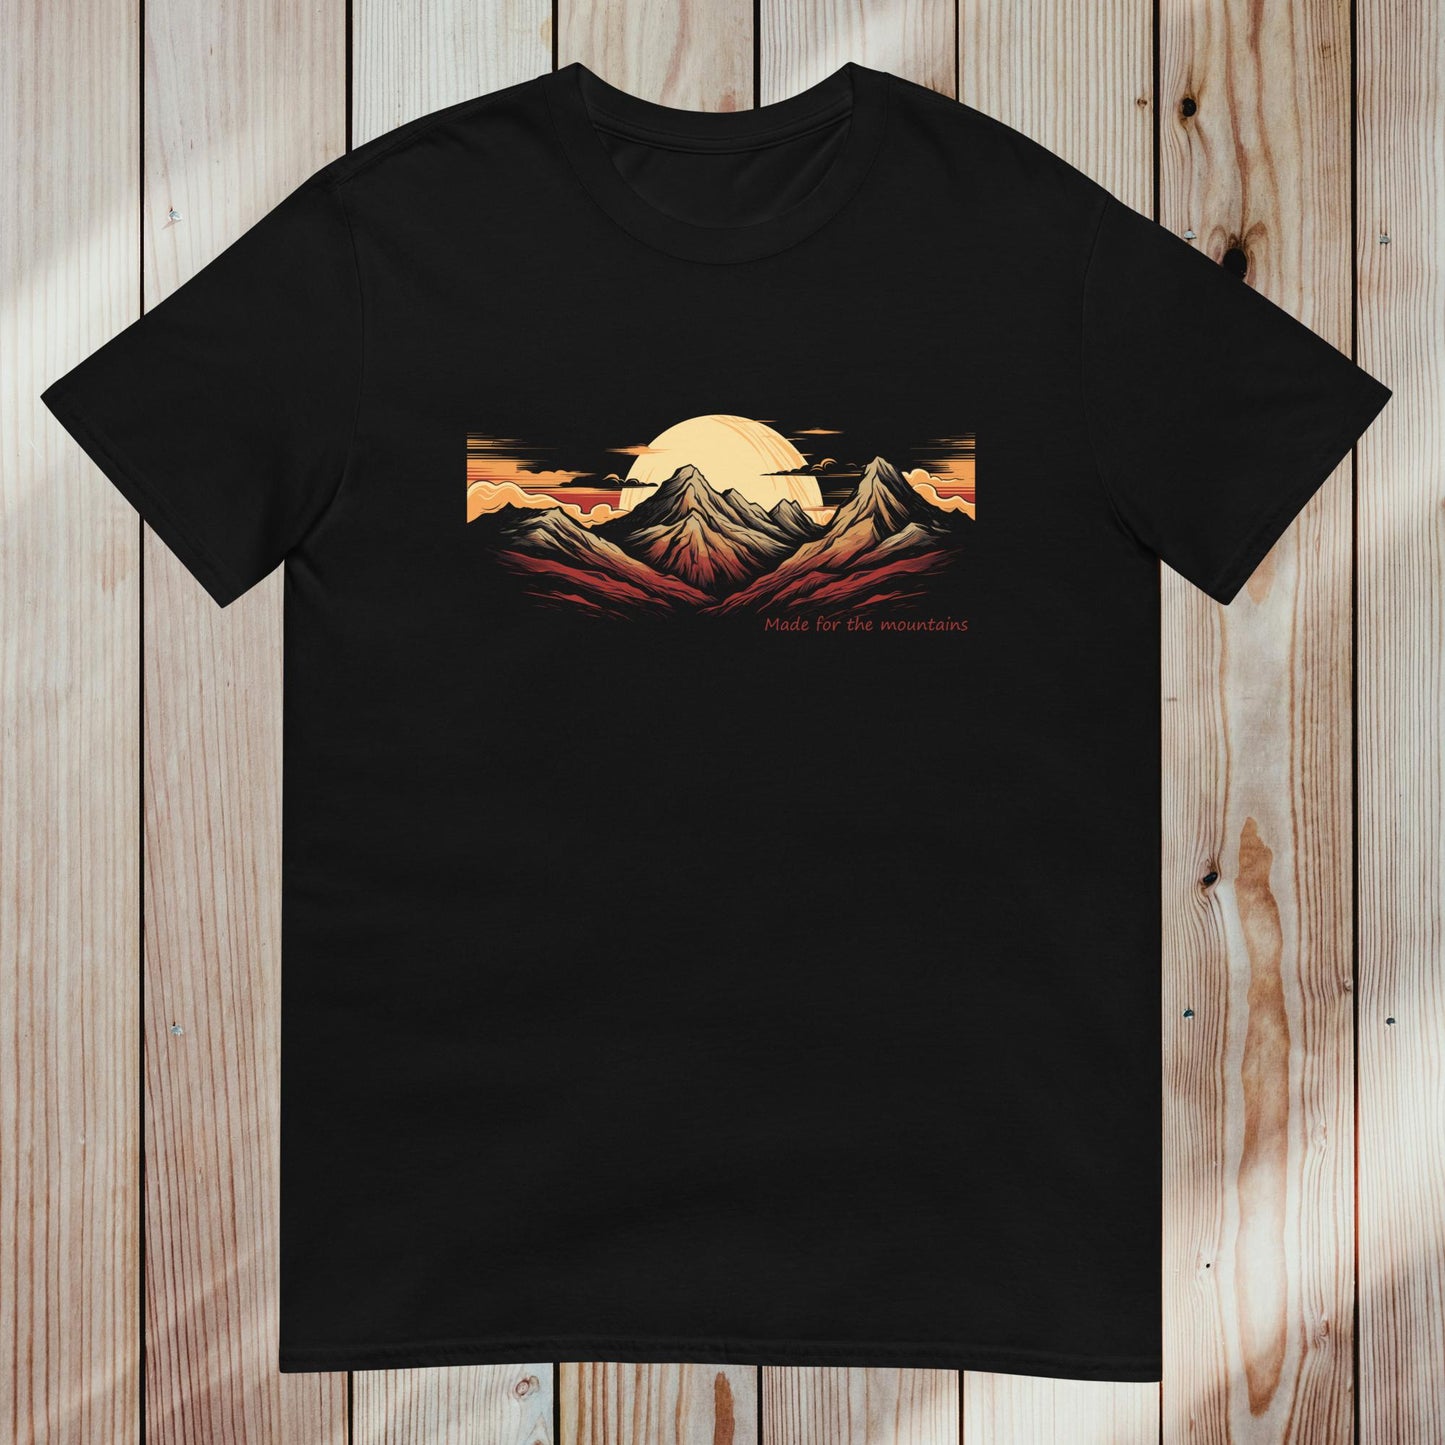 Unisex T-shirt: "Made for the mountains" 2